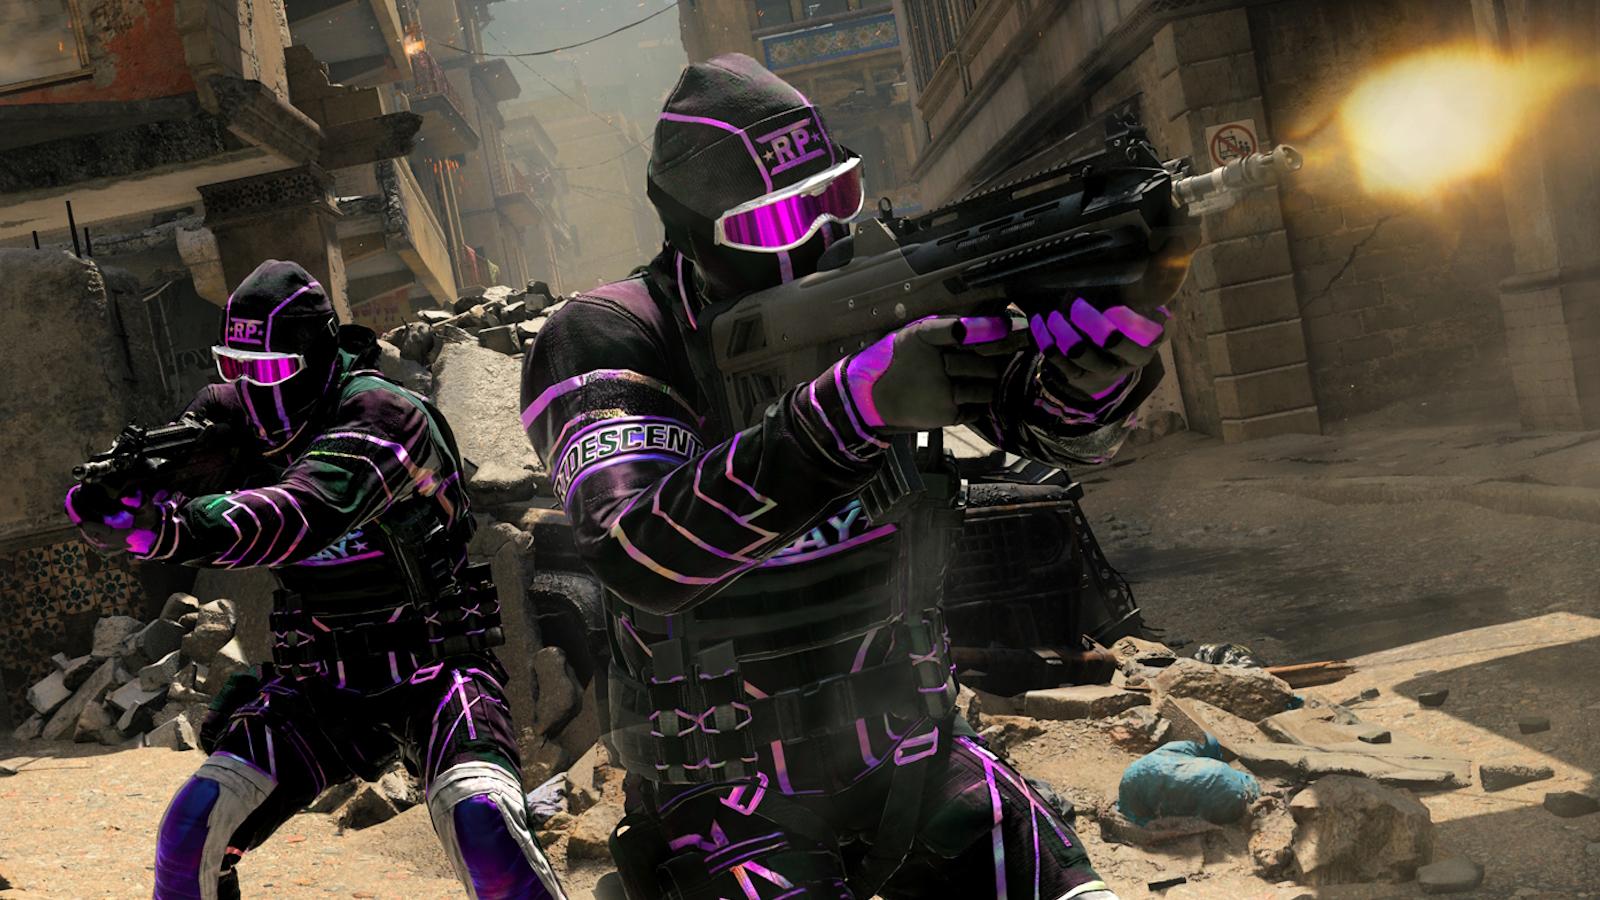 New Modern Warfare 3 skins available in Ranked Play.